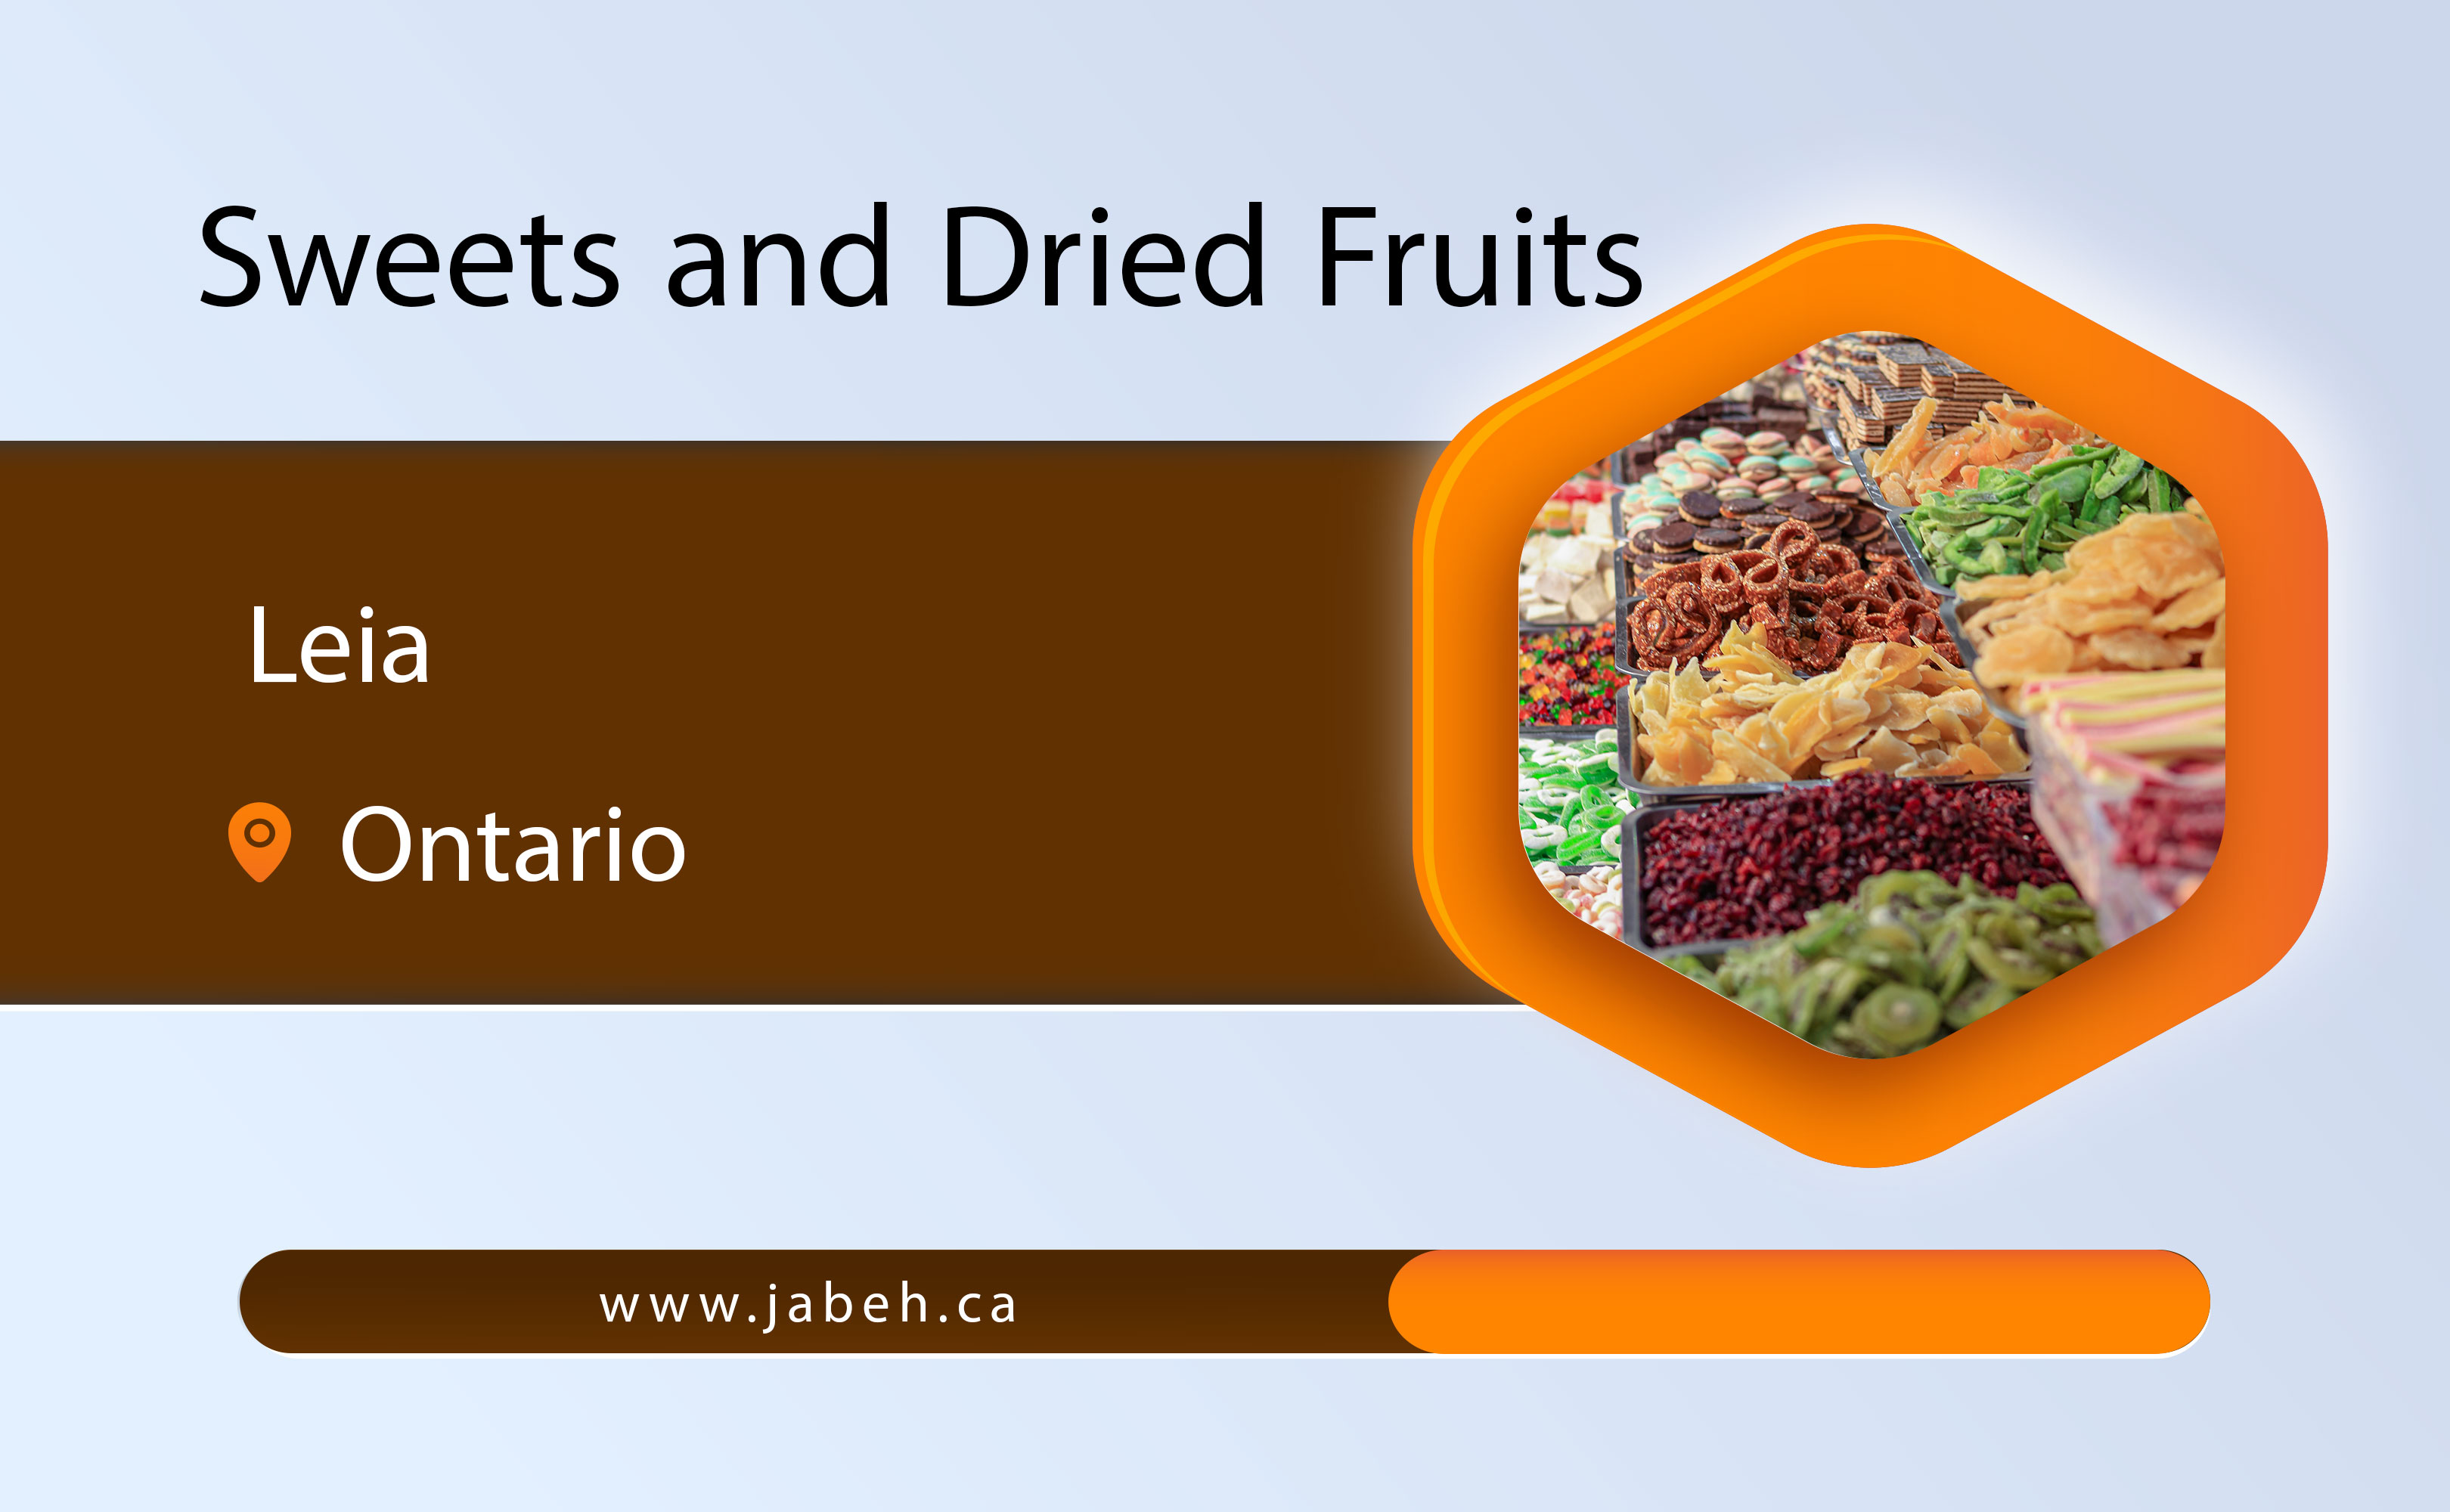 Leaia Iranian sweets and dried fruit in Ontario